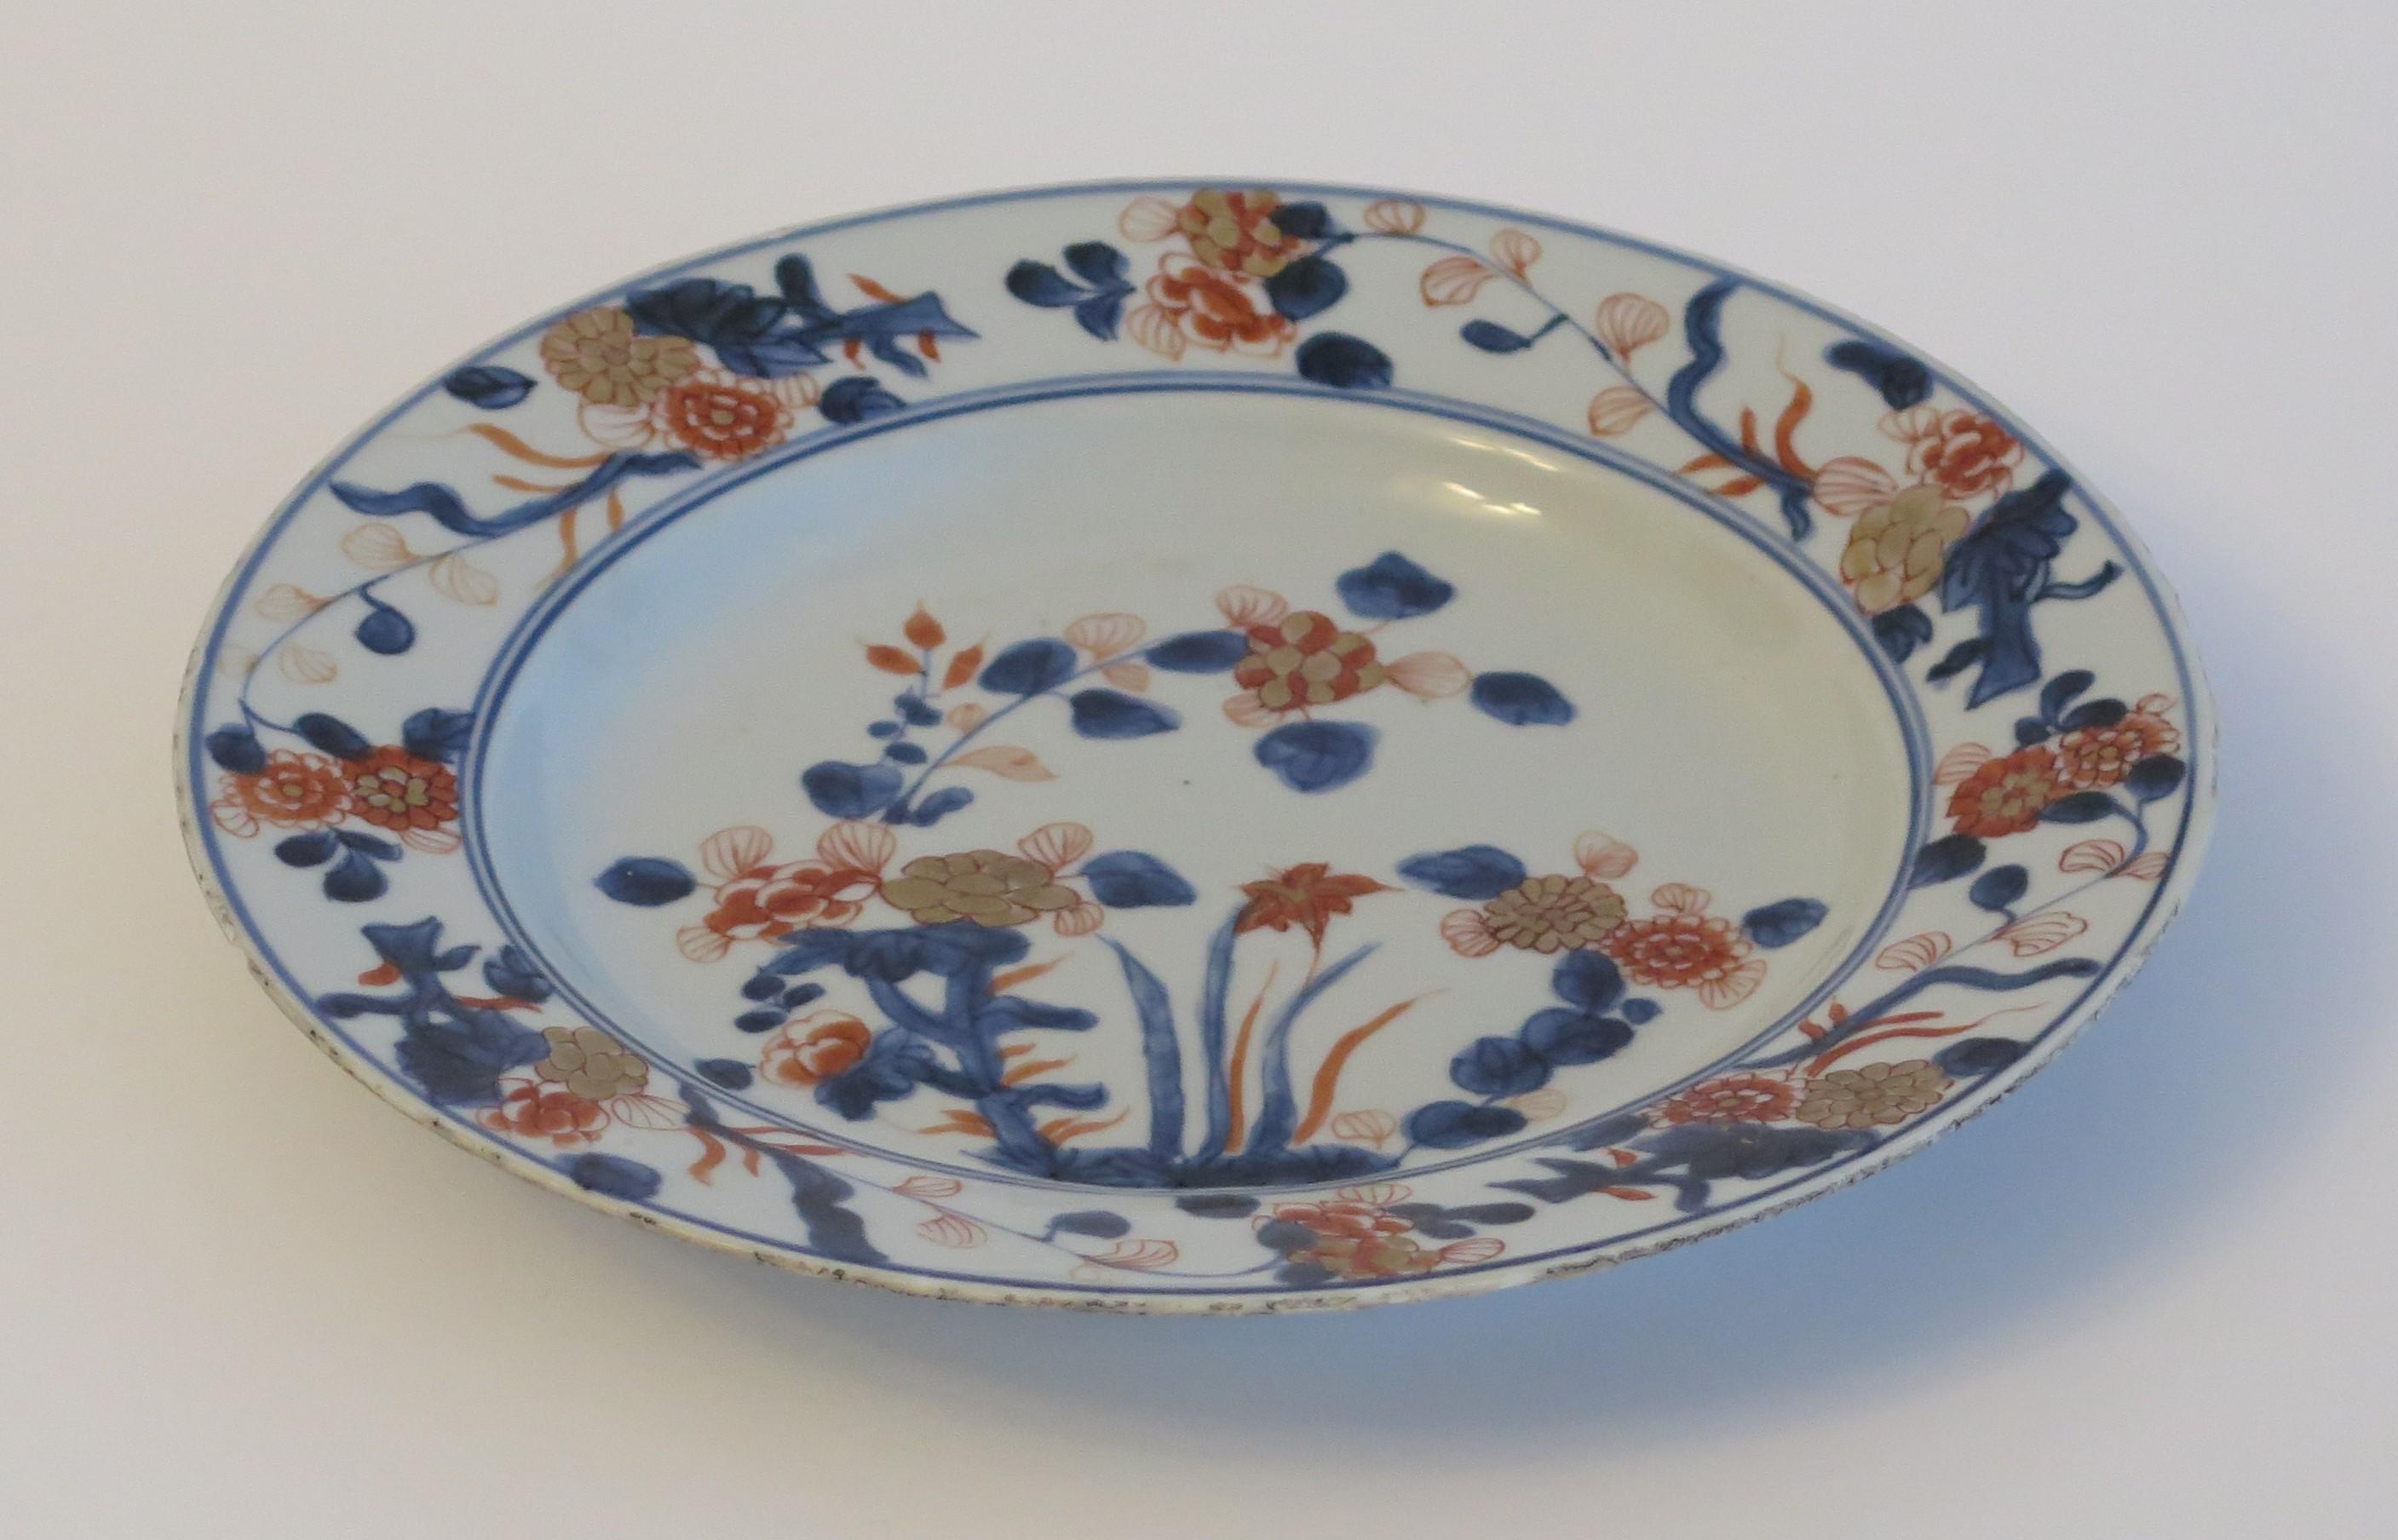 Chinese Porcelain Plate or Bowl Qing Kangxi Mark and Period, Ca 1700 In Good Condition For Sale In Lincoln, Lincolnshire